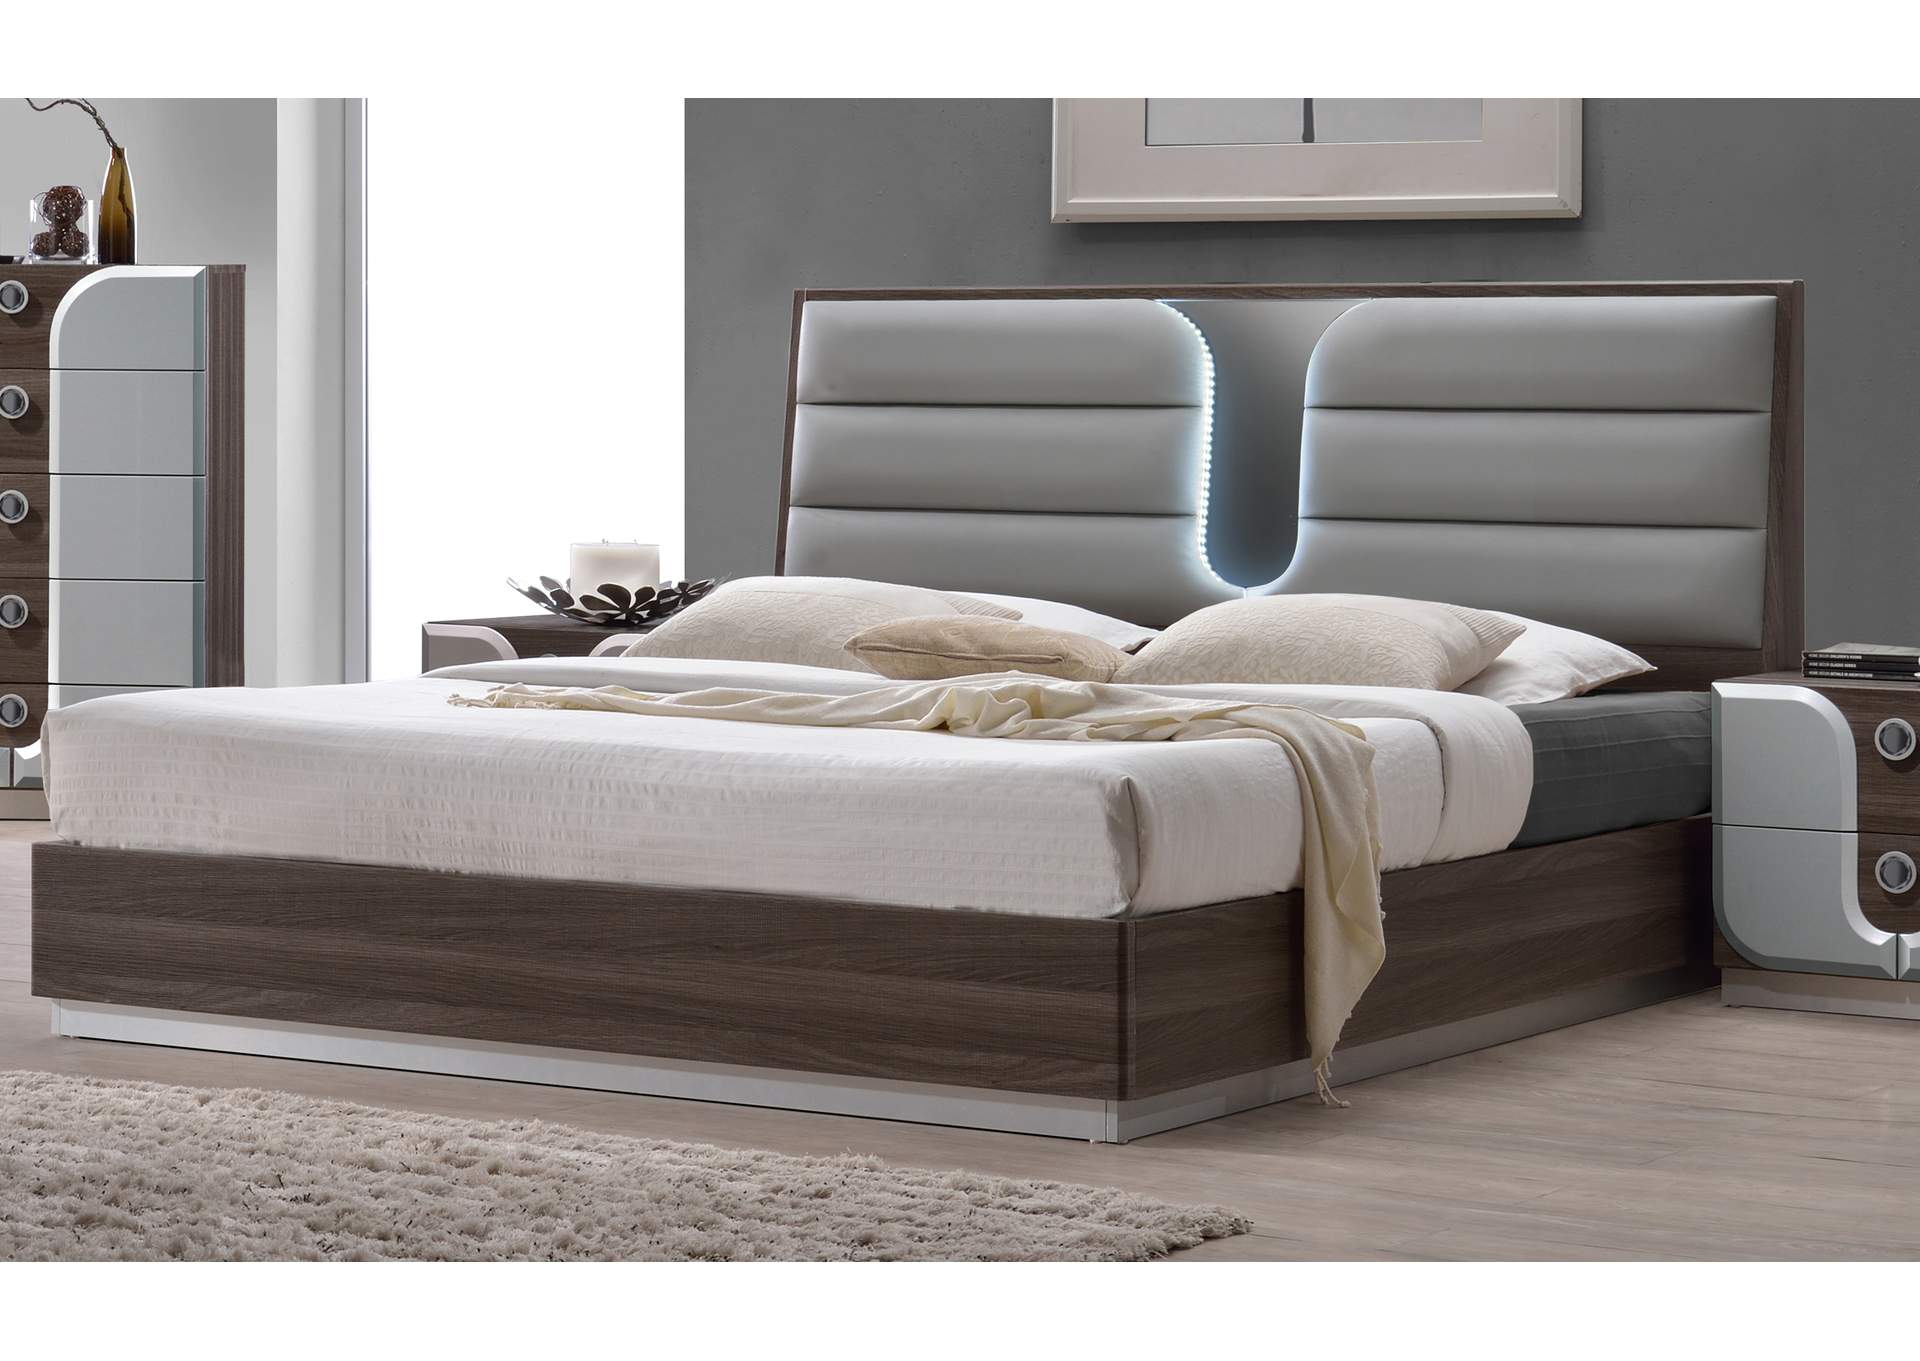 Modern 4-Piece Bedroom Set w/ Queen Size Bed,Chintaly Imports